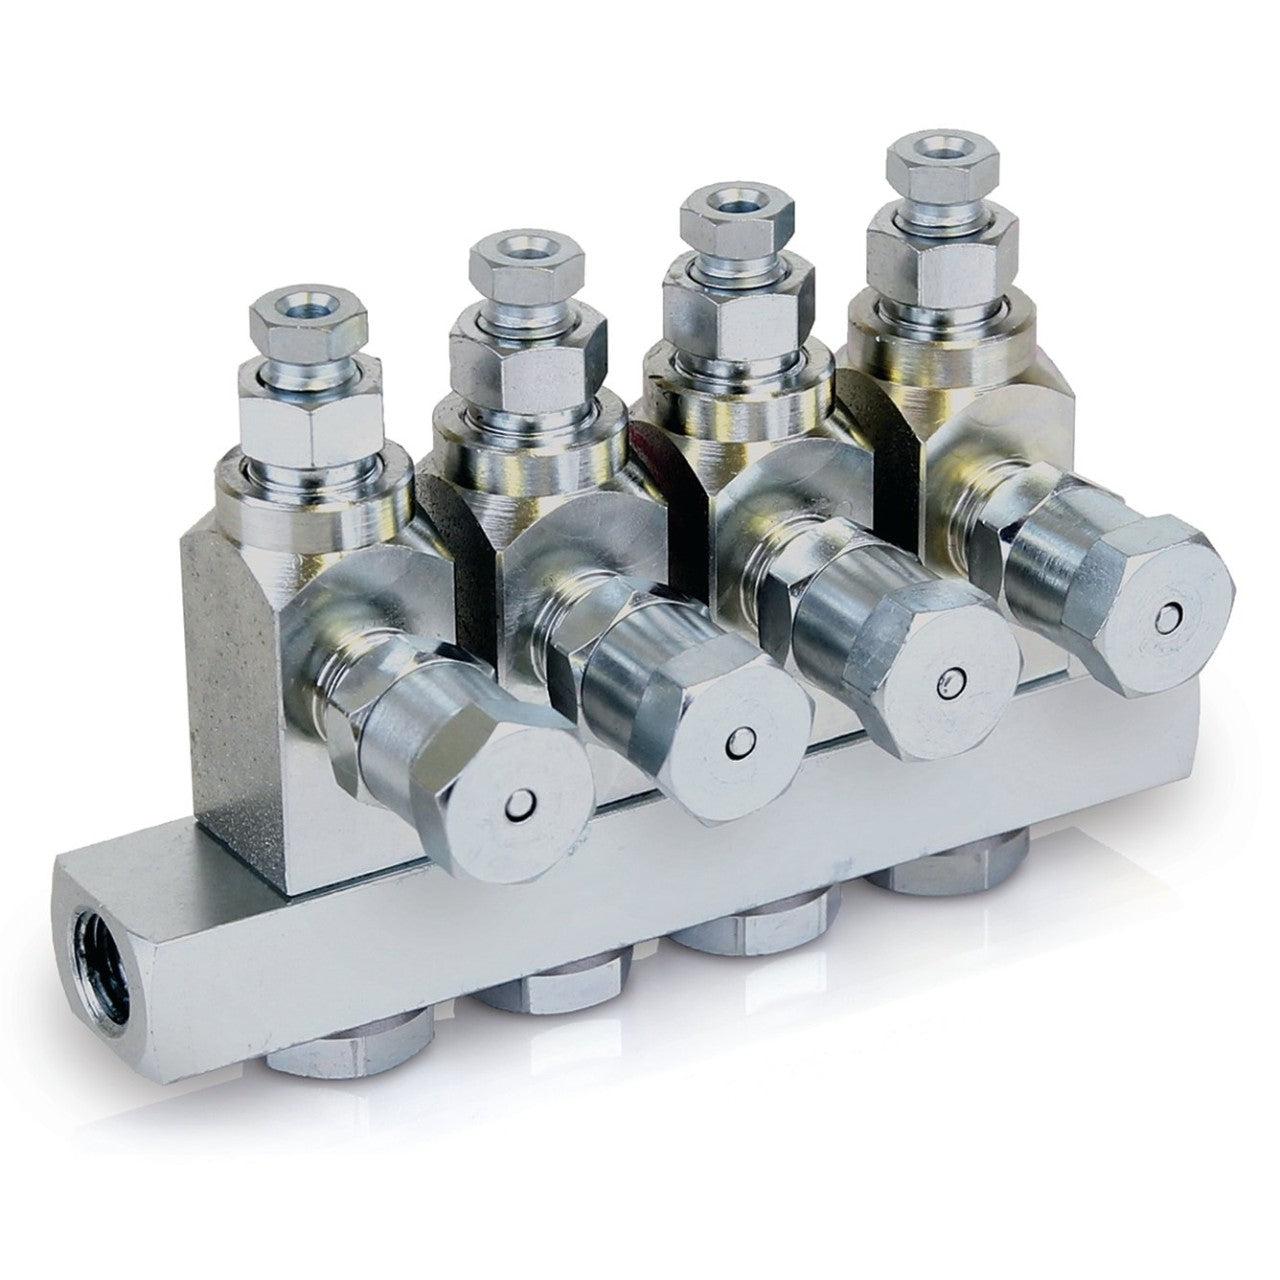 GL-32™ Grease Injector, 304 Stainless Steel, 4-Injector Manifold, 1/4 NPT